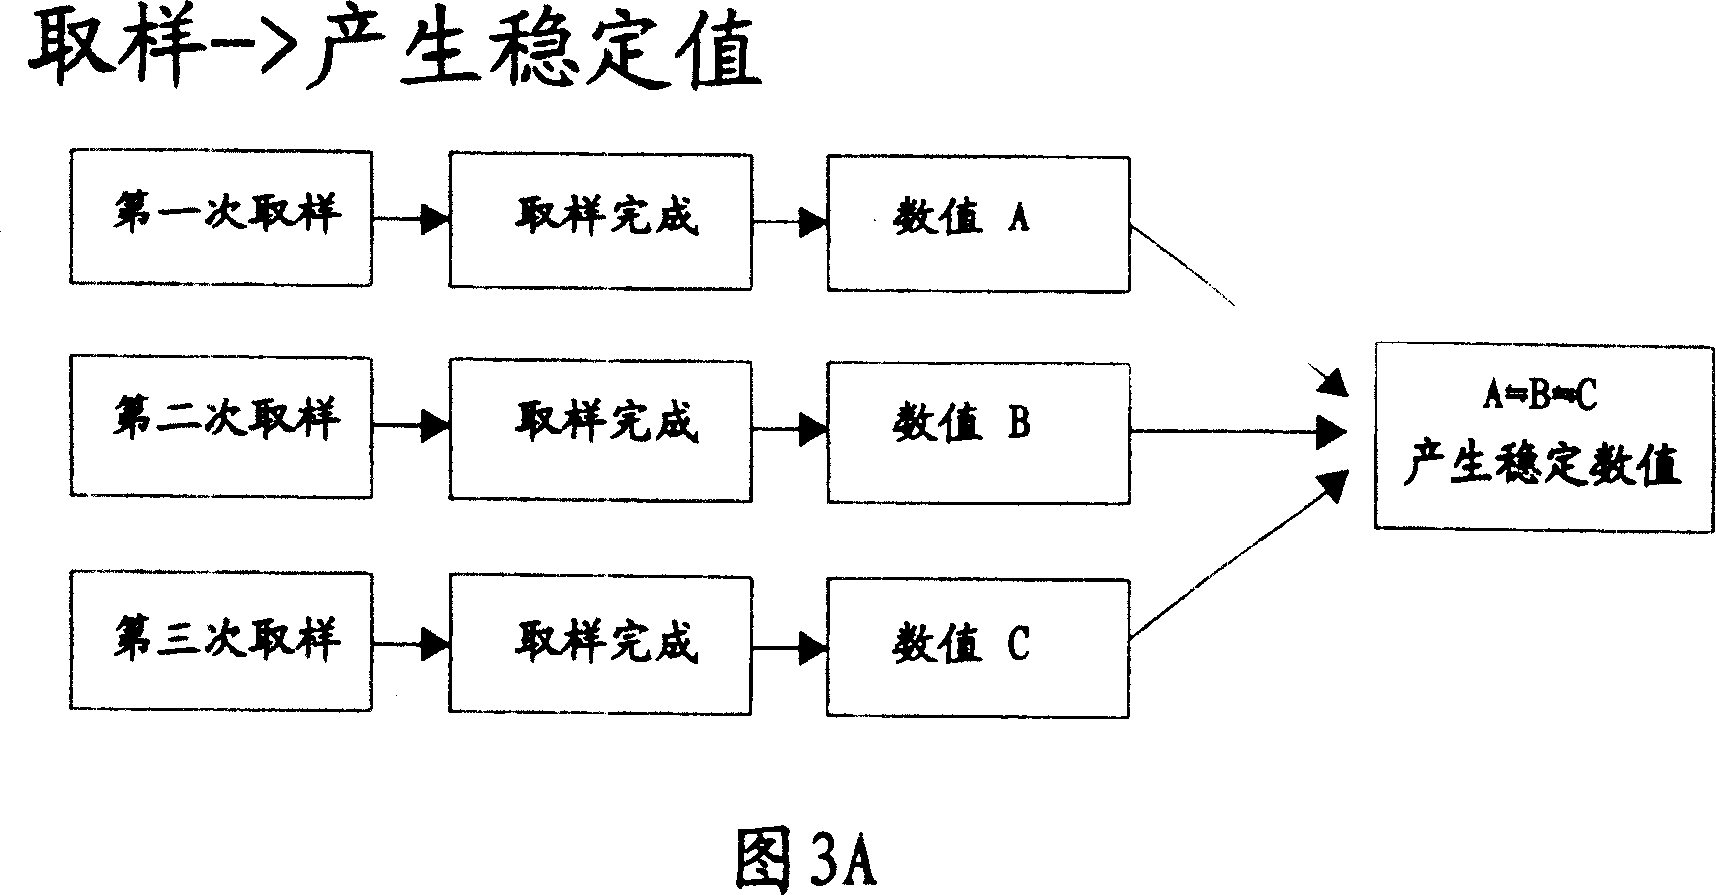 System to adjusting running machine running belt velocity according to the current loading difference